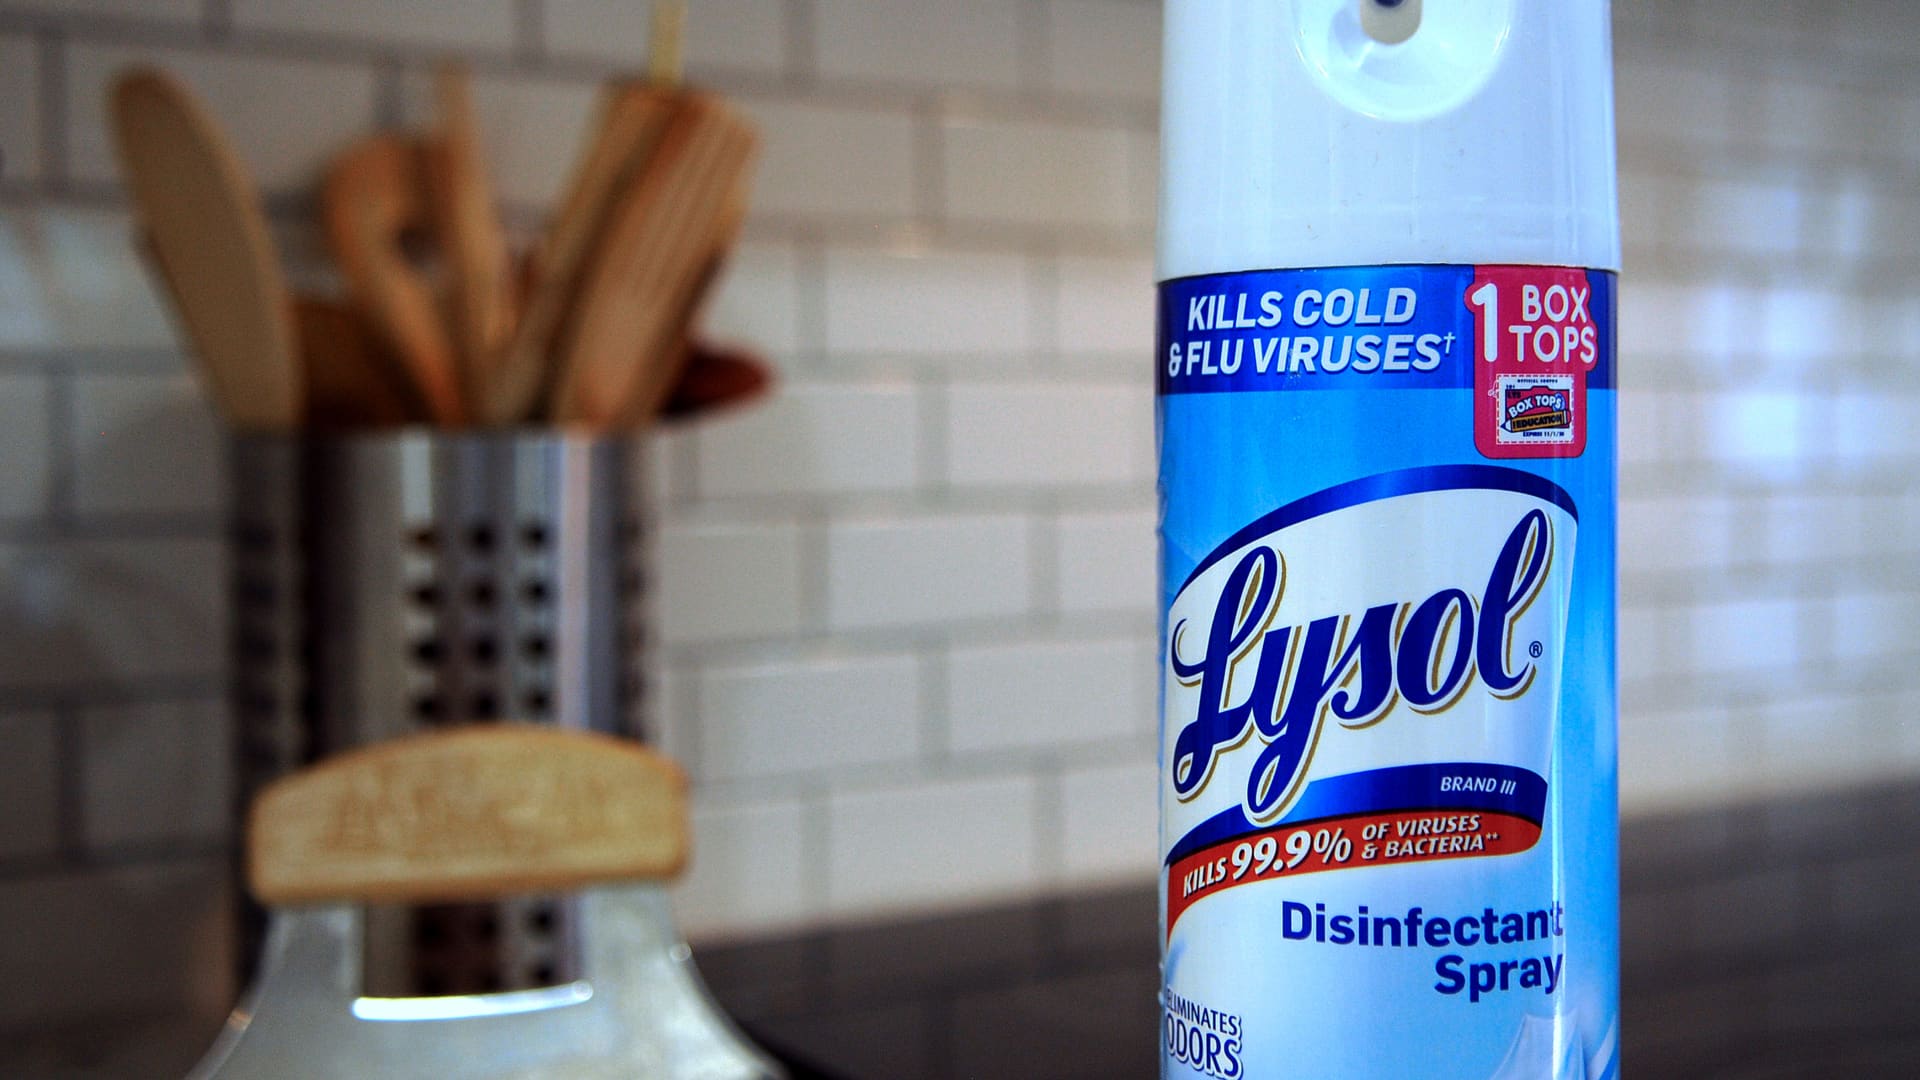 CEO of Lysol maker: Sales are up as a result of coronavirus pandemic